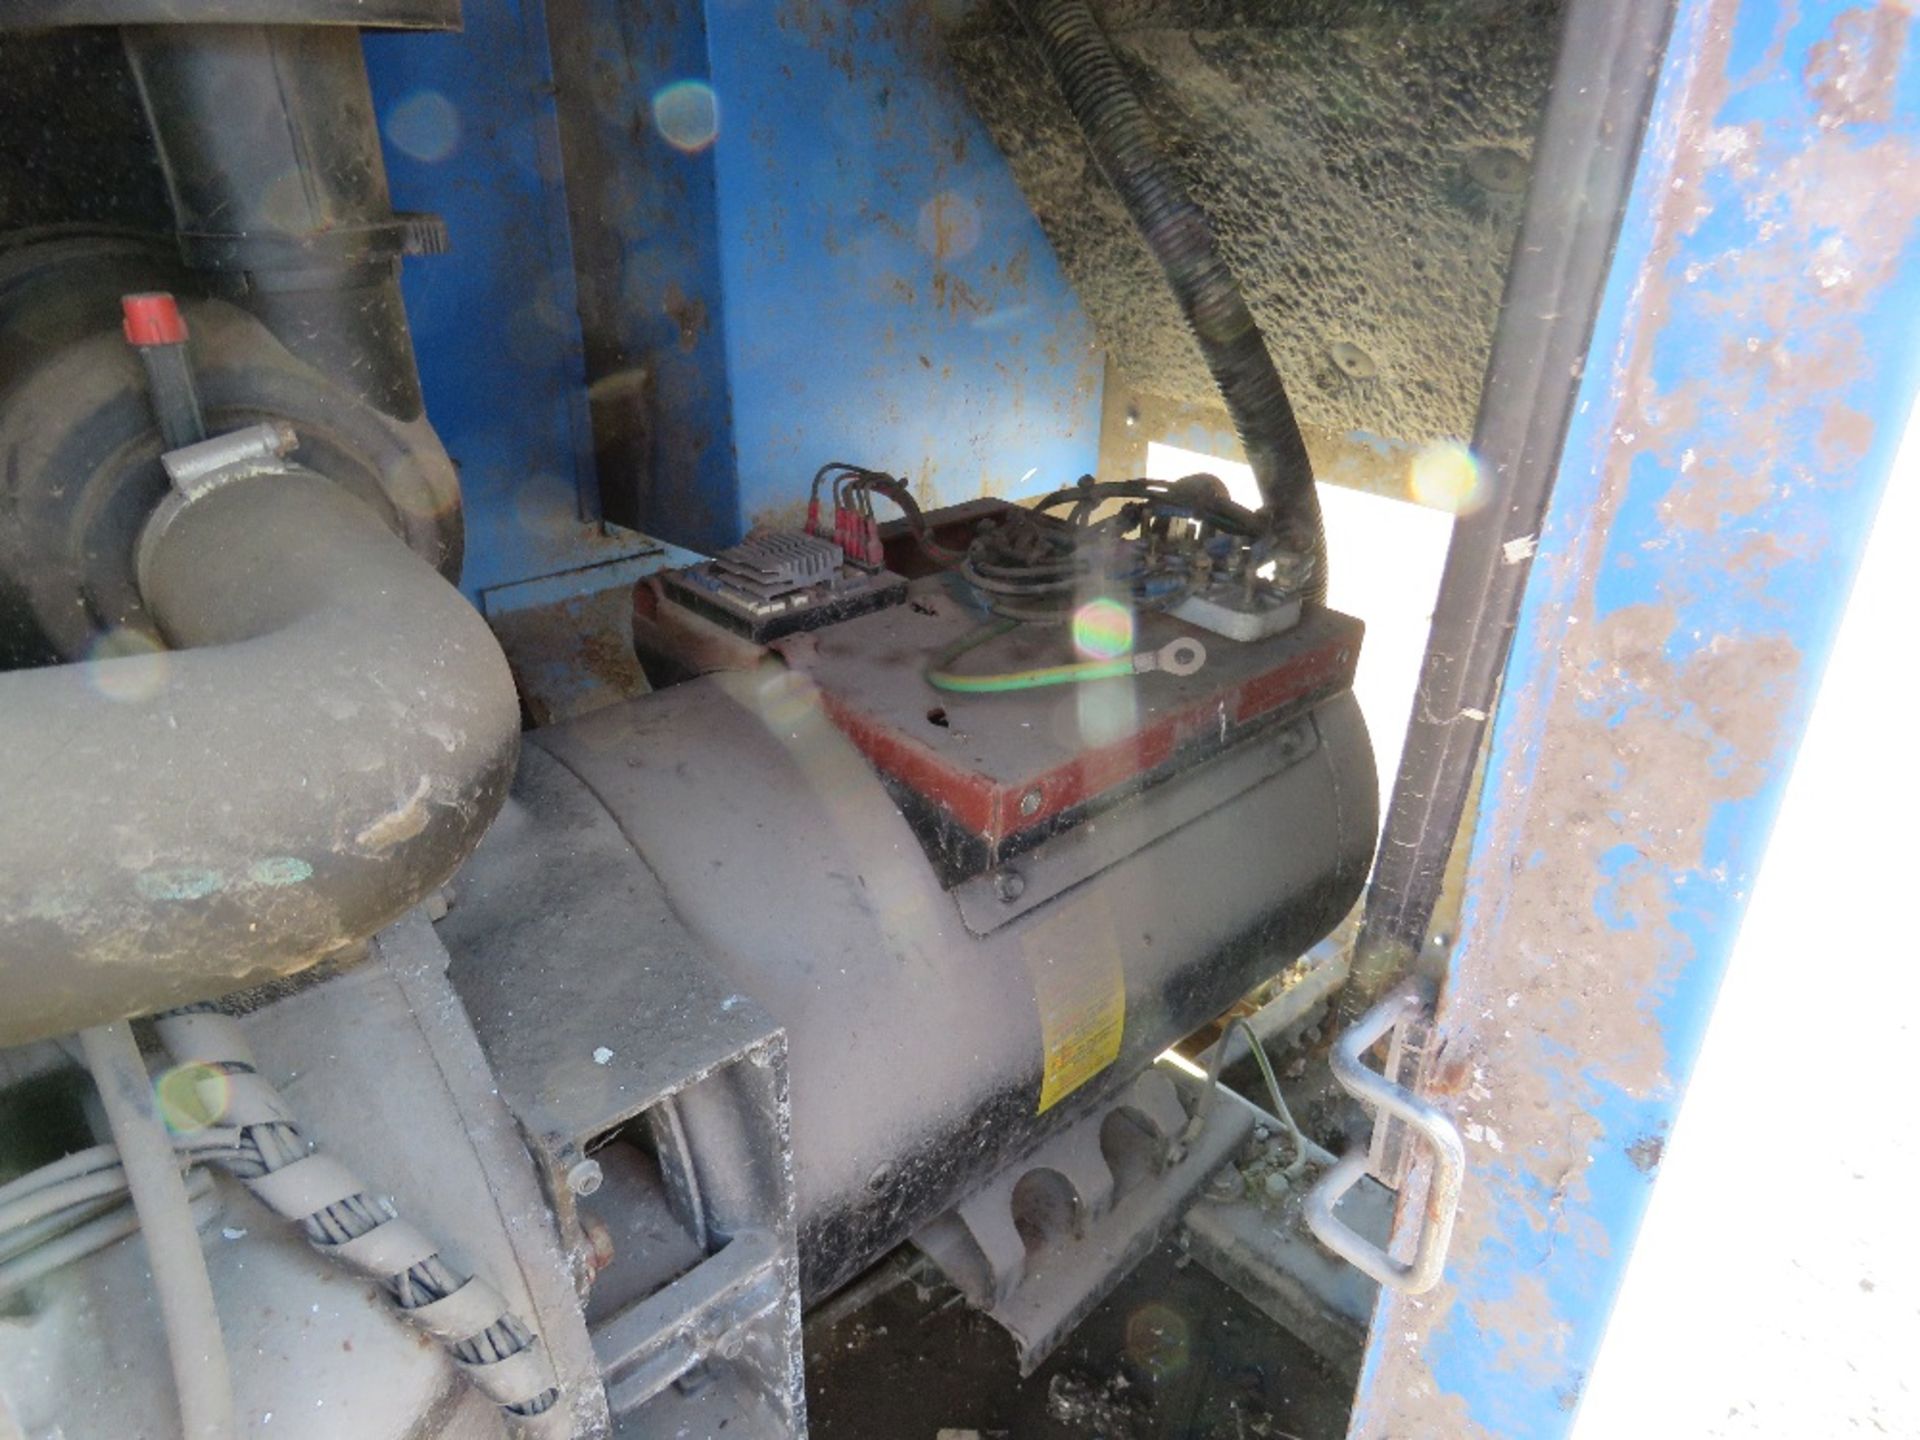 STEPHILL SSDX20 GENERATOR SET, ISUZU ENGINE, PARTS MISSING, SPARES/REPAIR. THIS LOT IS SOLD UNDER T - Image 4 of 8